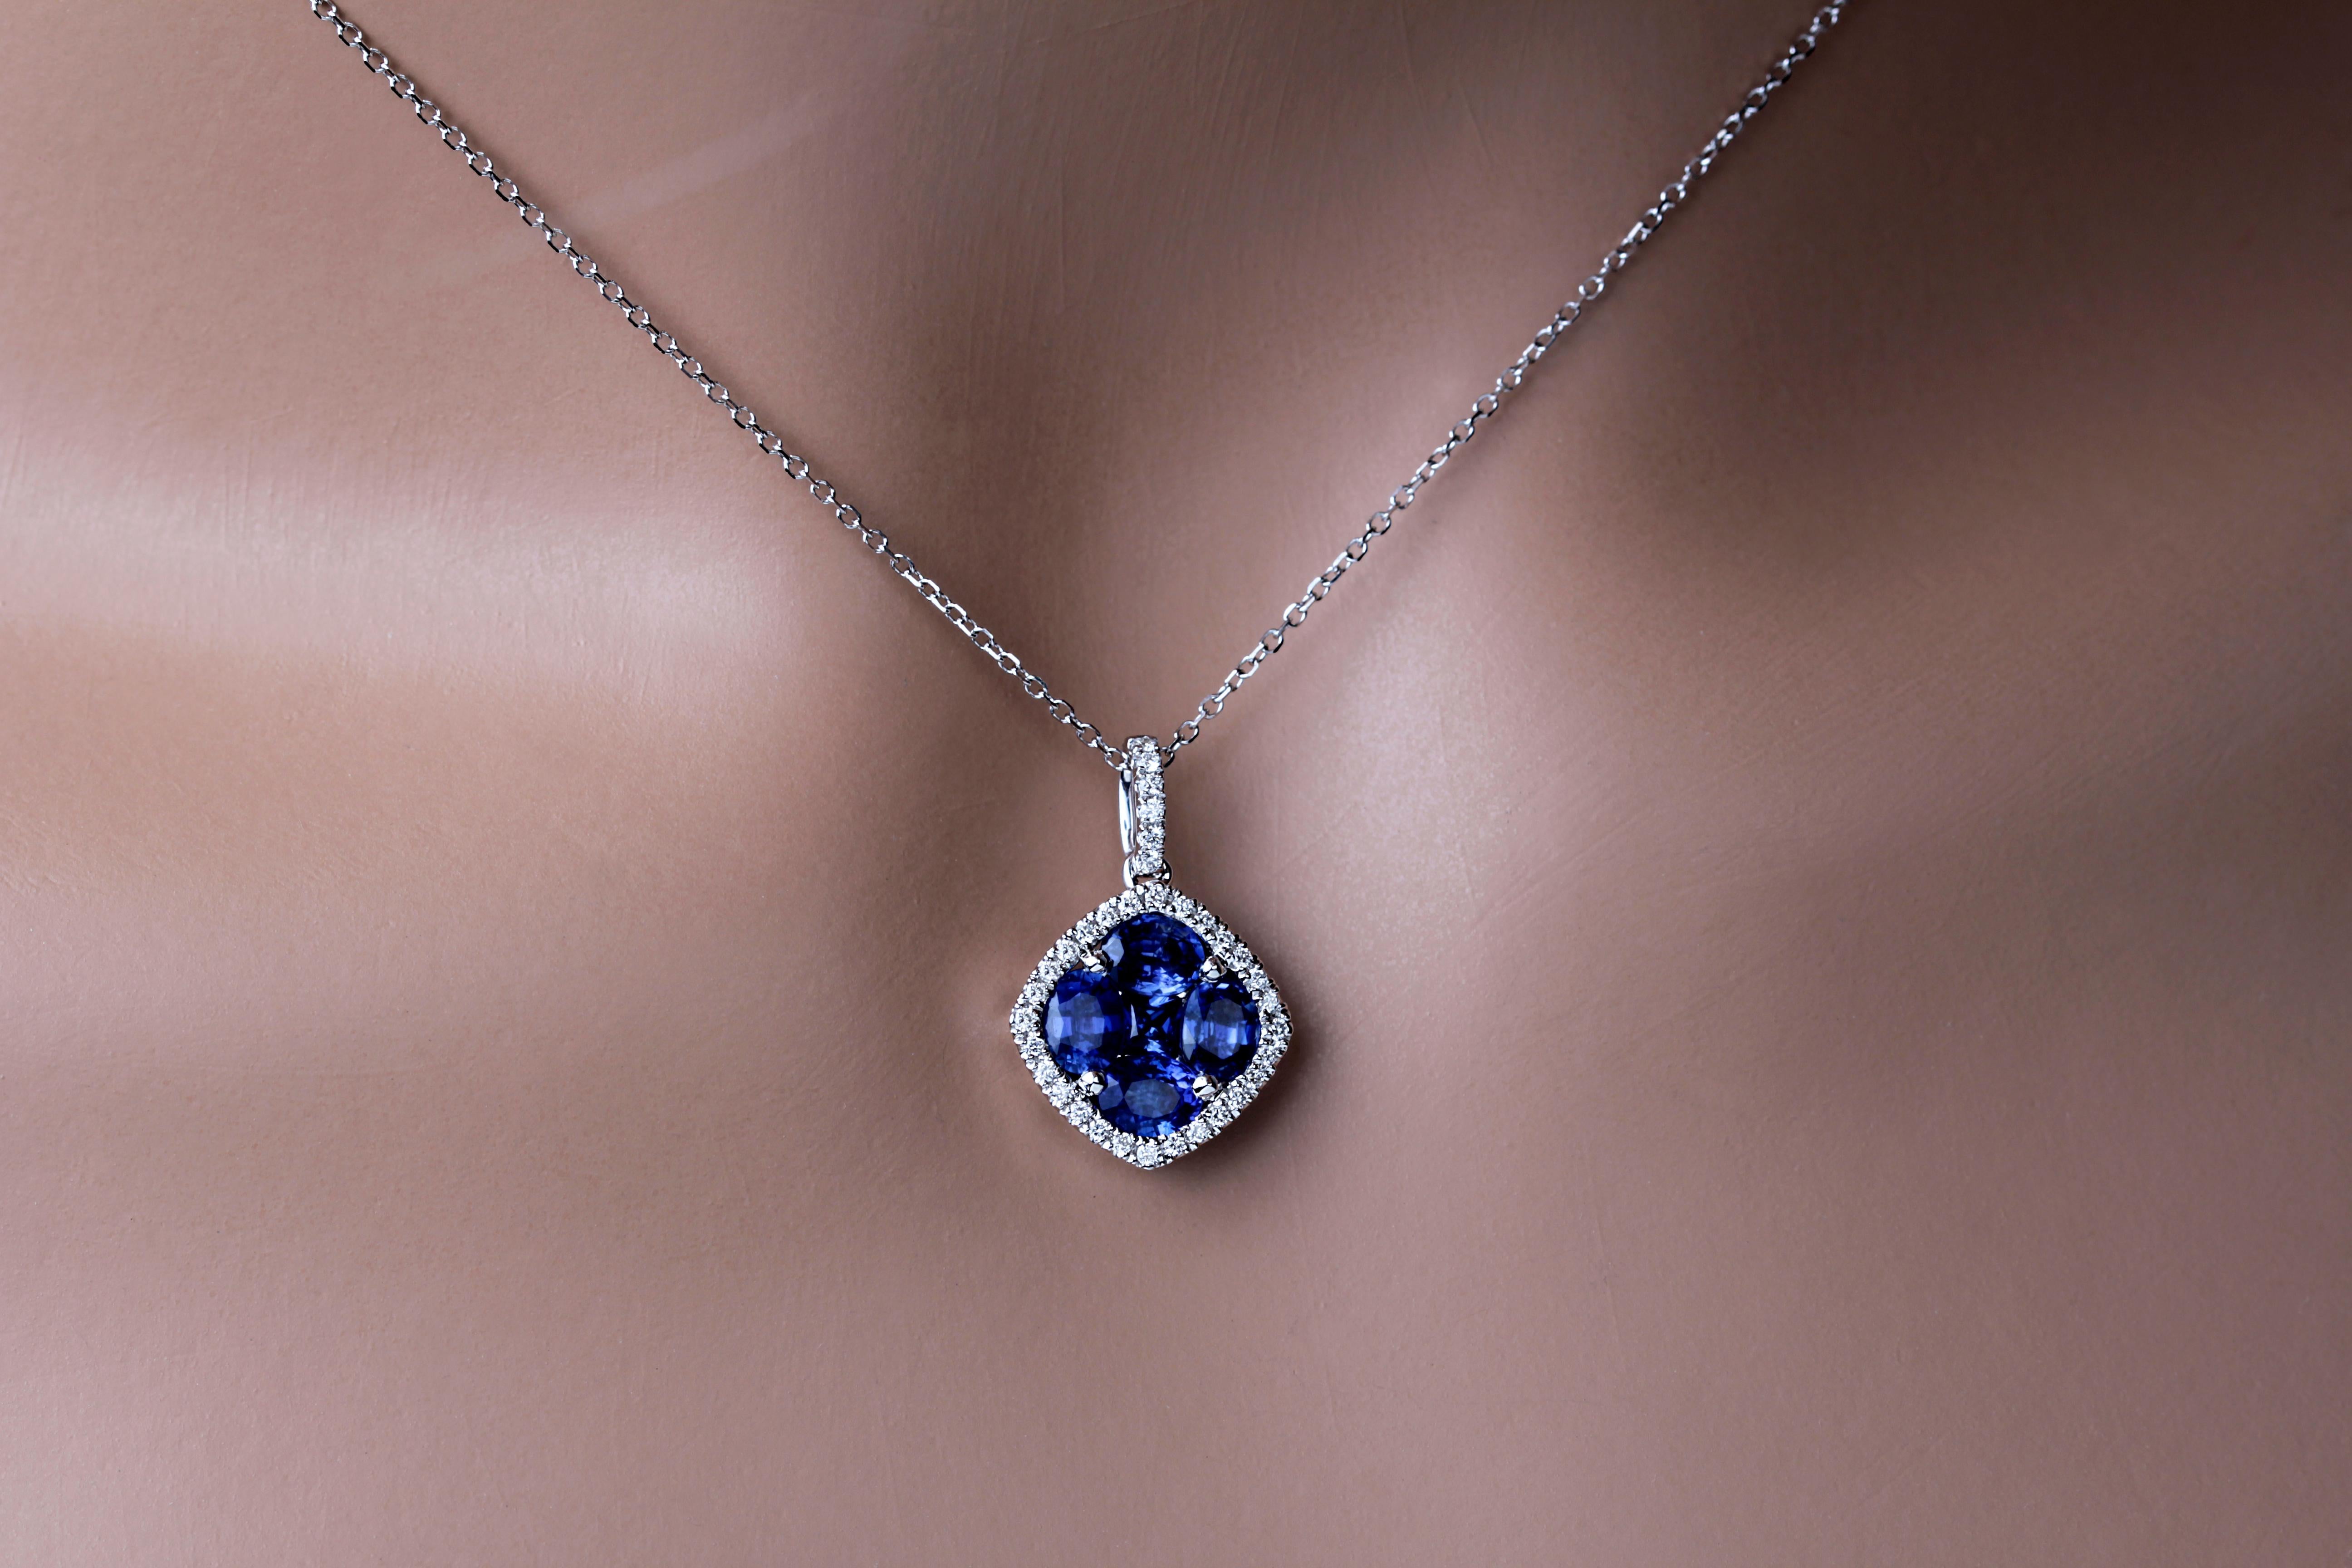 Prepare to be captivated by the sheer elegance and beauty of our Blue Sapphire and Diamond Cluster Pendant. This pendant is a dazzling fusion of vibrant sapphires and scintillating natural diamonds, creating a truly unique and enchanting piece of